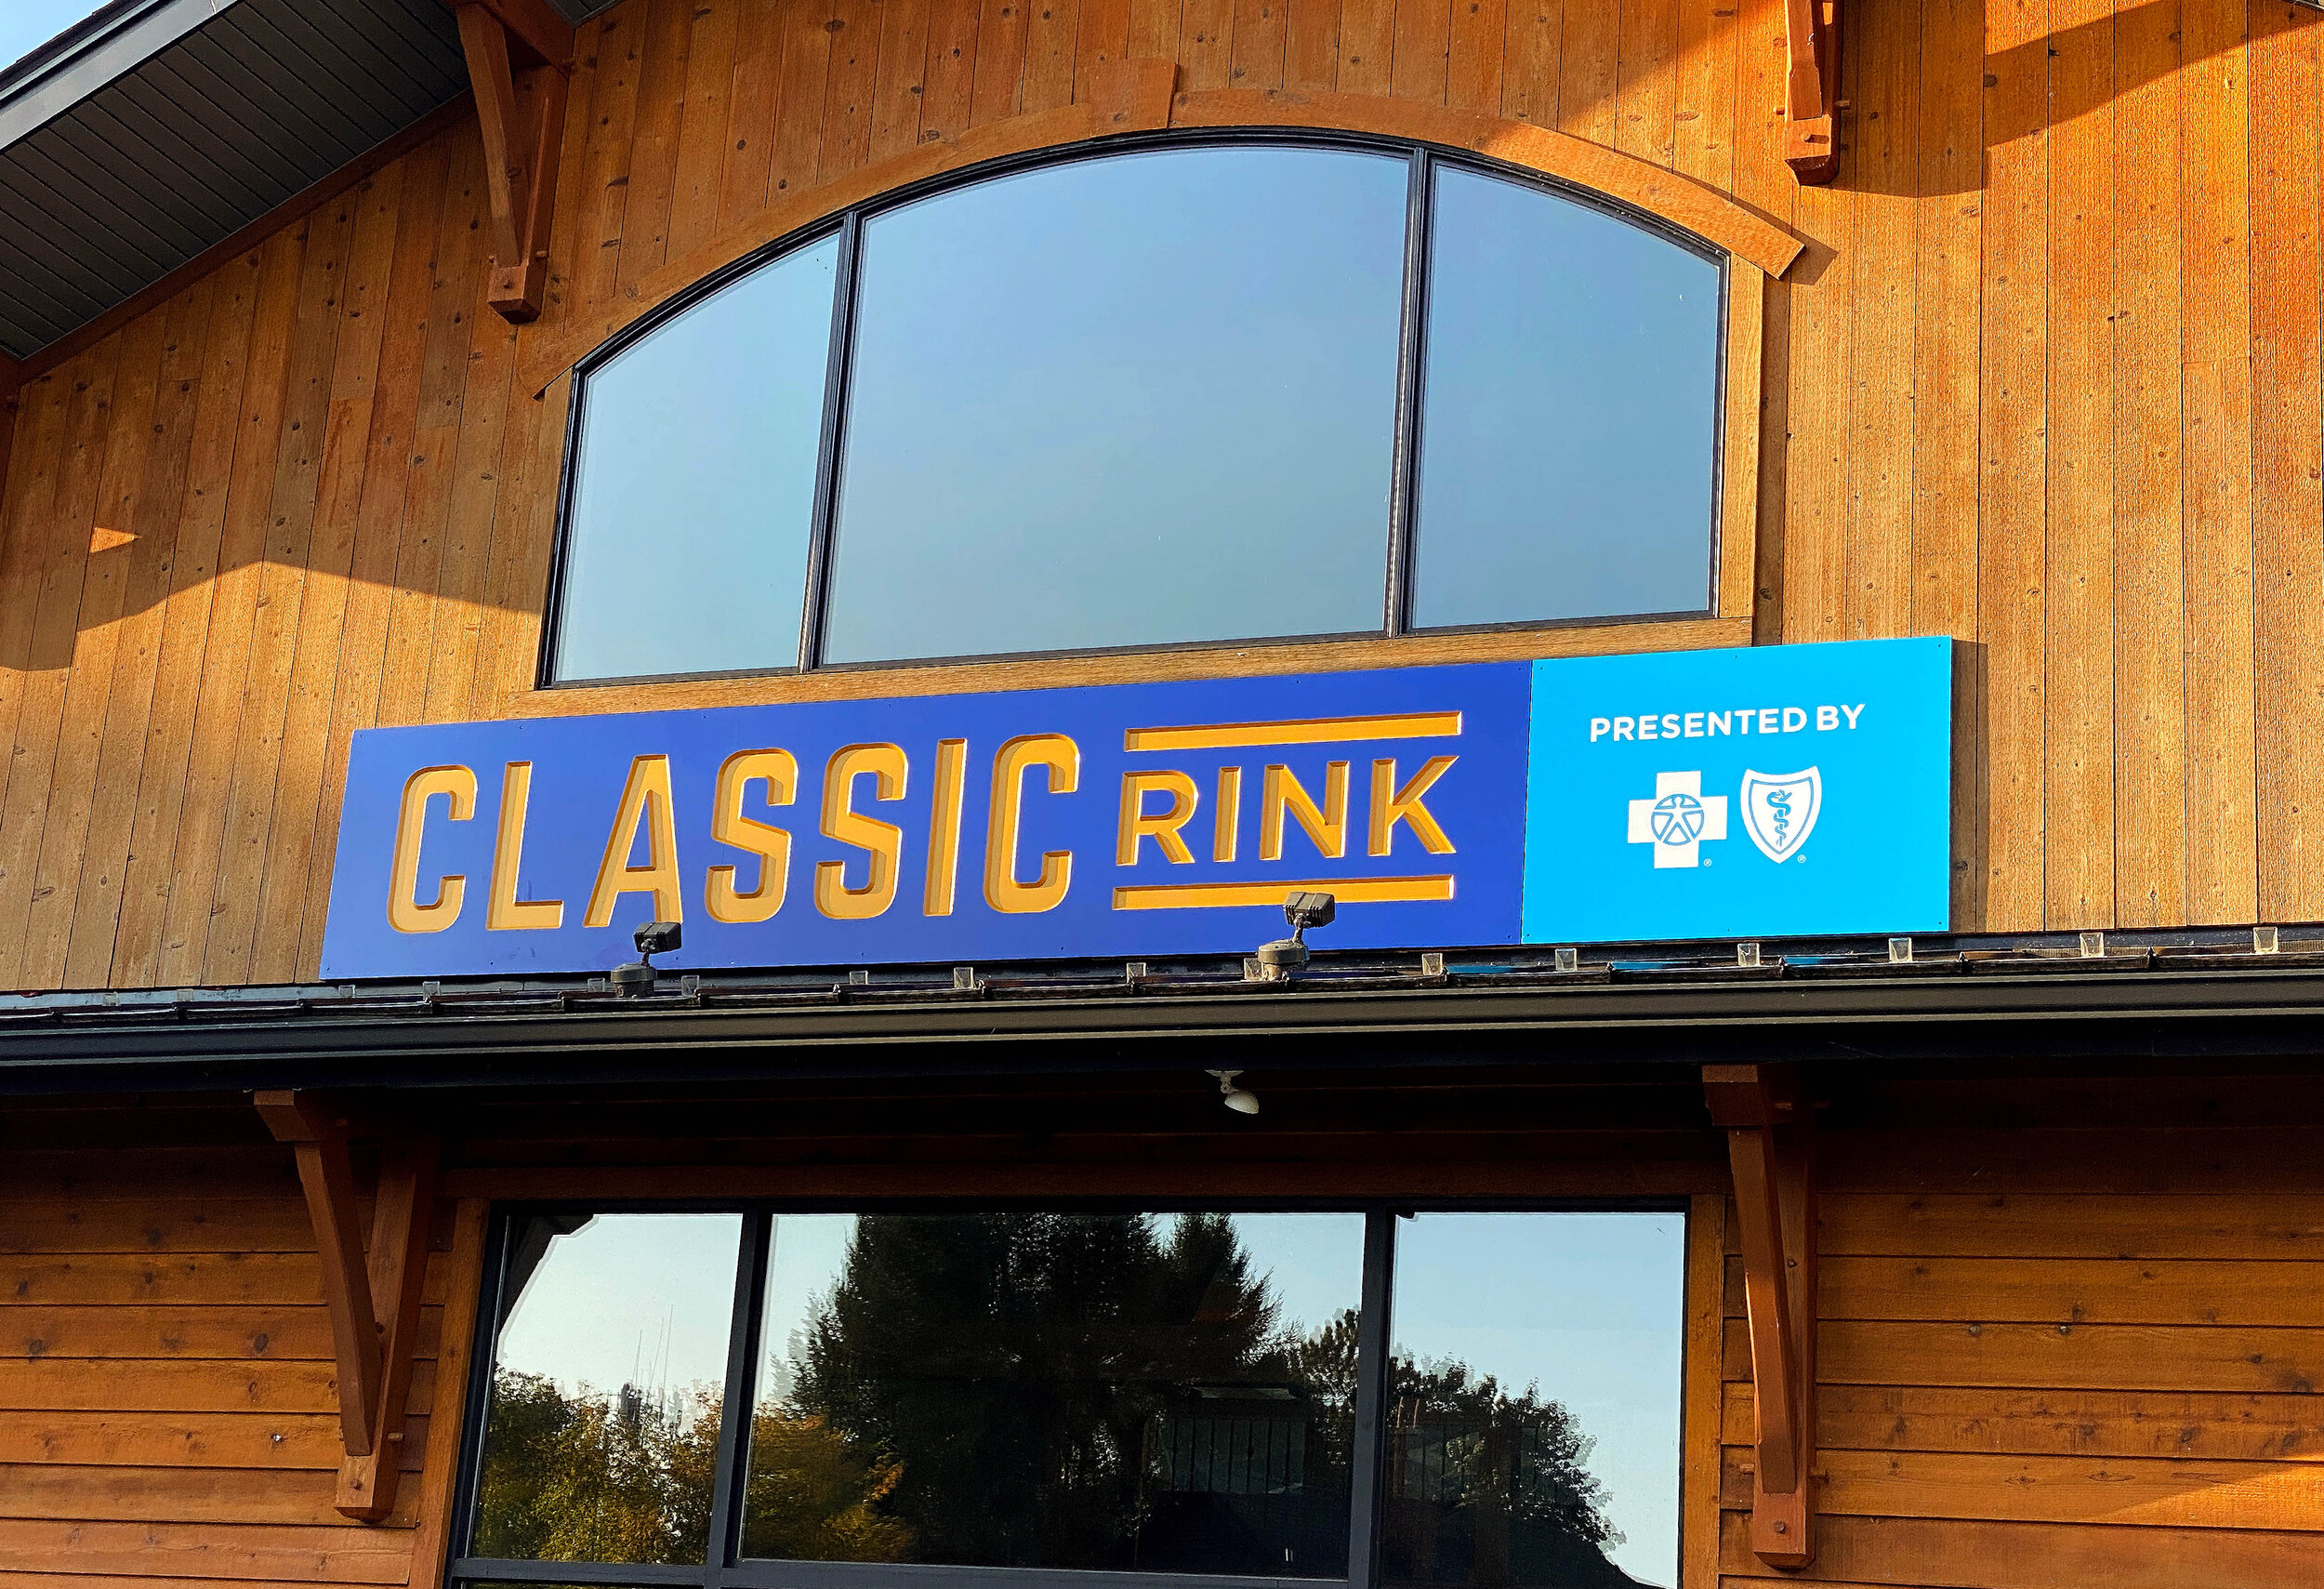 Classic Rink Identity and Signage